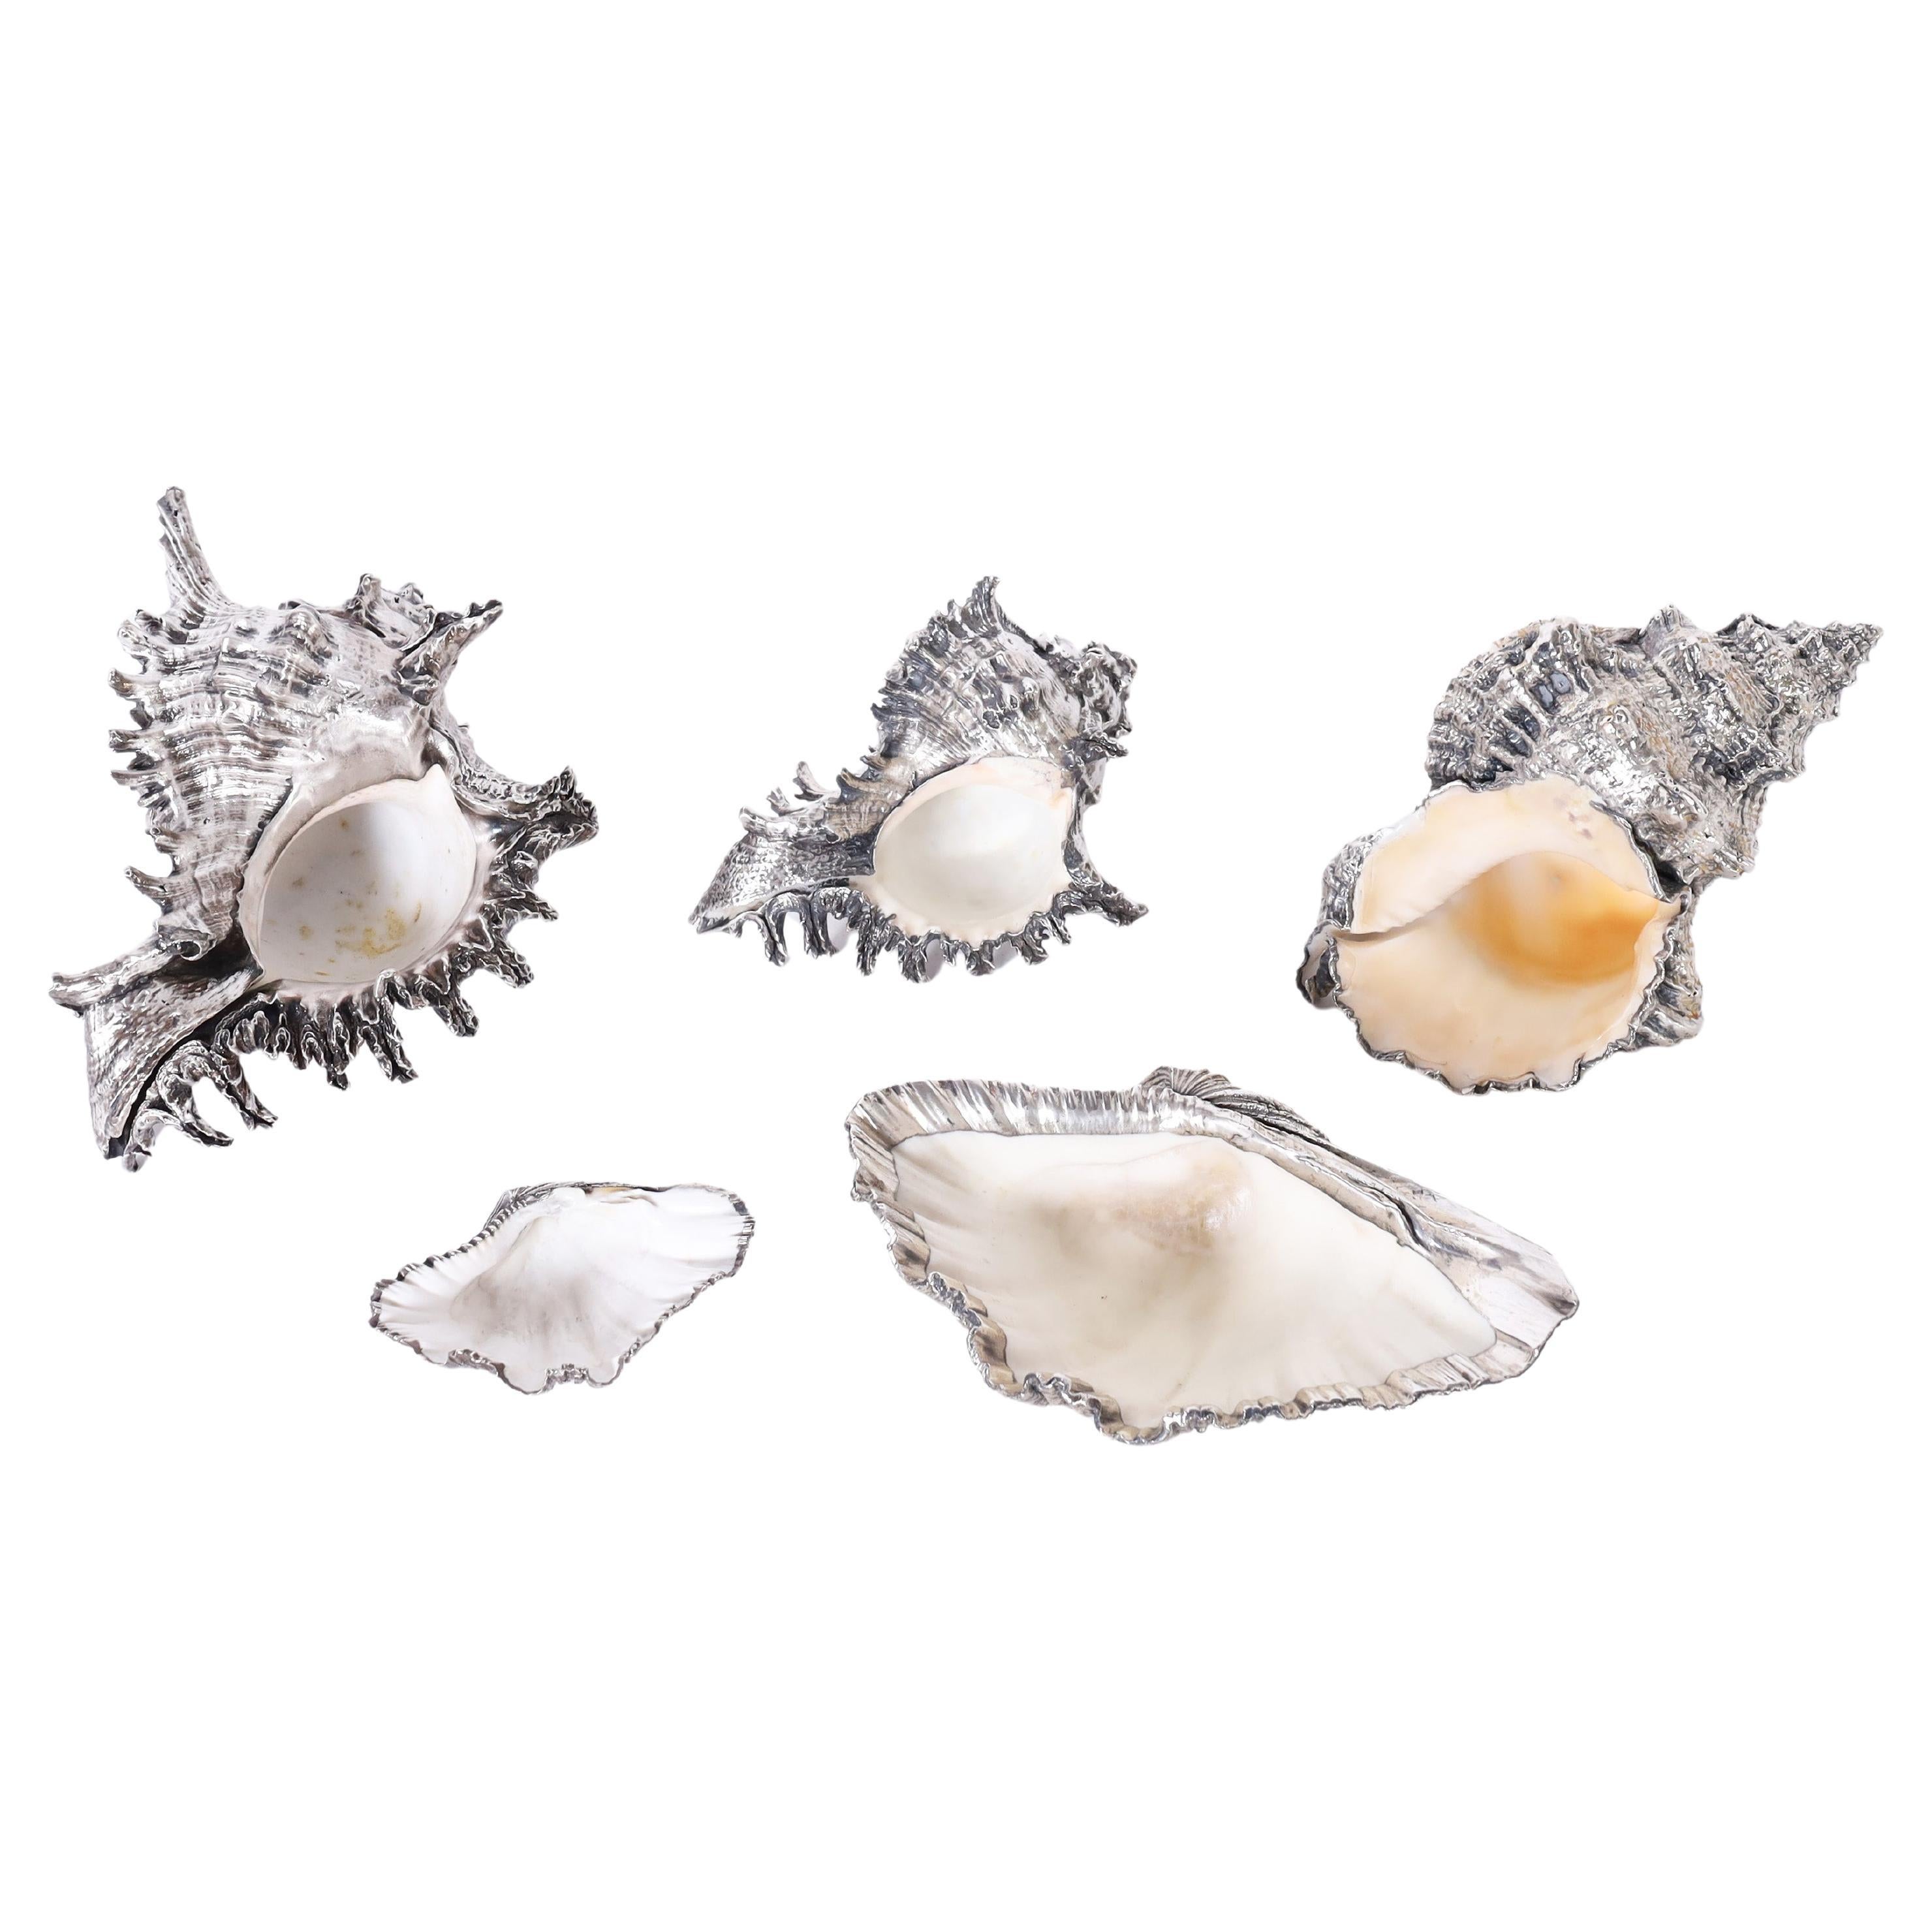 Vintage Group of Five Silver Overlay Seashells, Priced Individually 